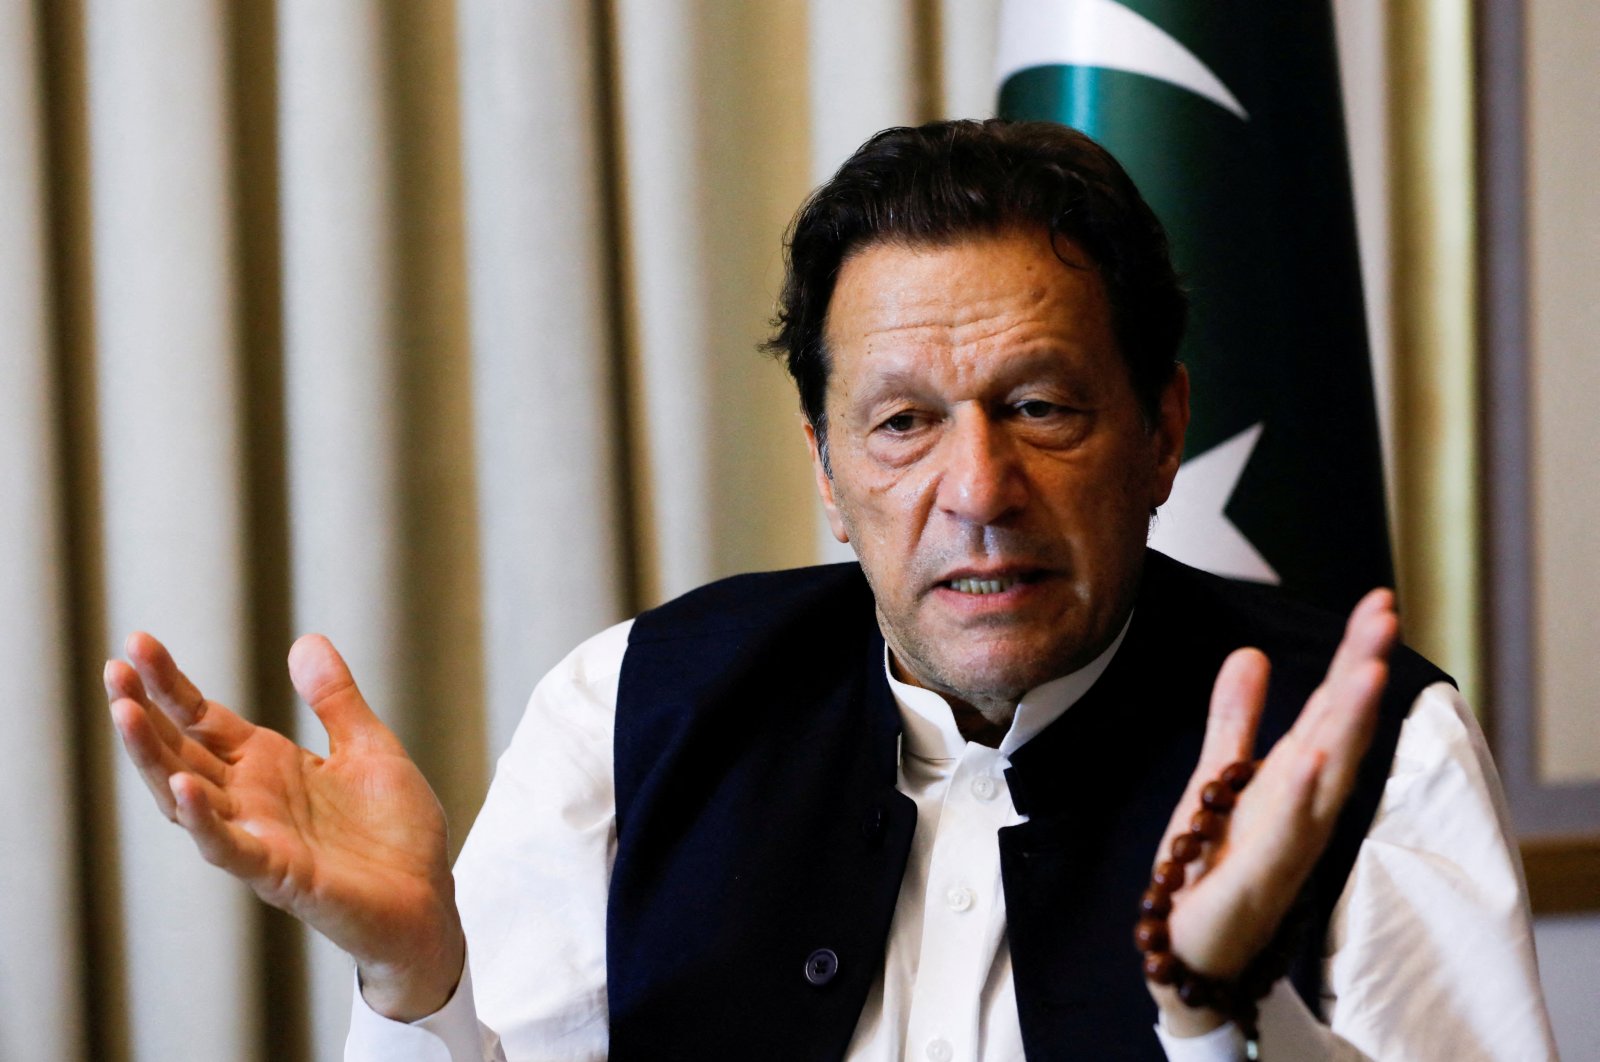 Former Pakistani PM Imran Khan speaks during an interview in Lahore, Pakistan, March 17, 2023. (Reuters Photo)